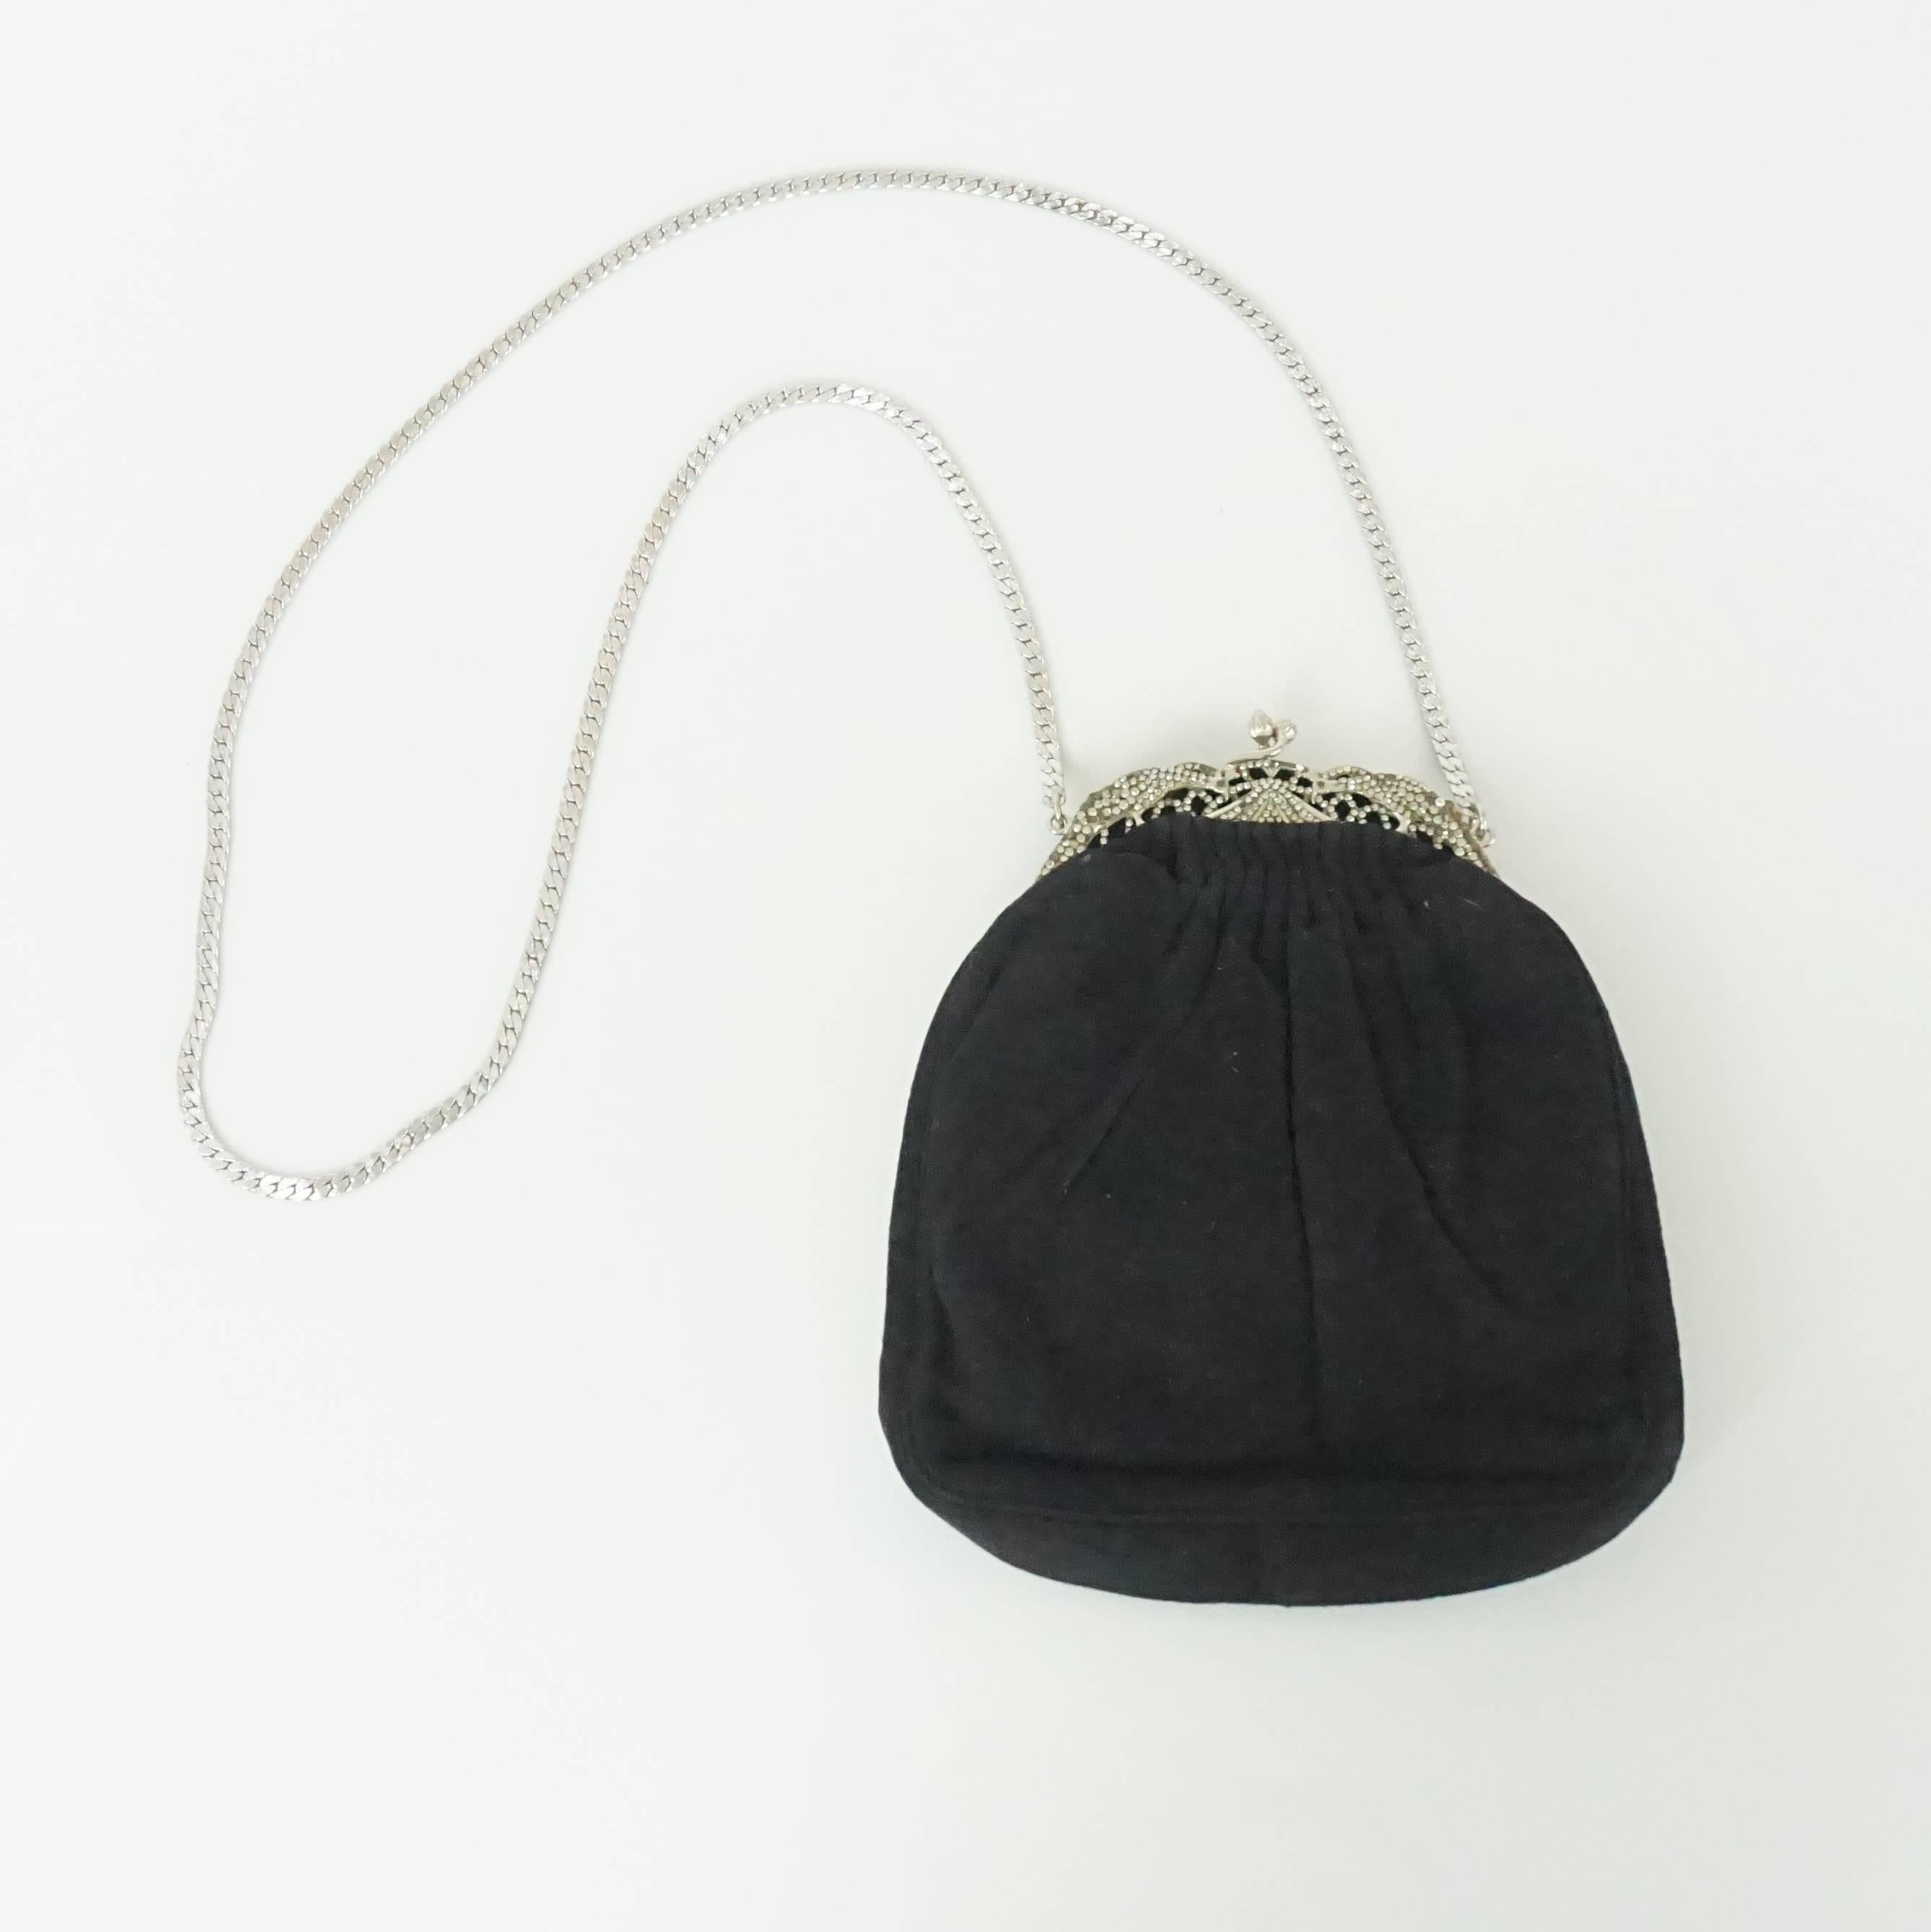 Judith Leiber Black Suede Rhinestone Evening Bag. This beautiful piece mixes new with vintage trends. It is in fair vintage condition with some wear to the suede and rhinestones on the top being missing. The bag has a black satin lining and a silver